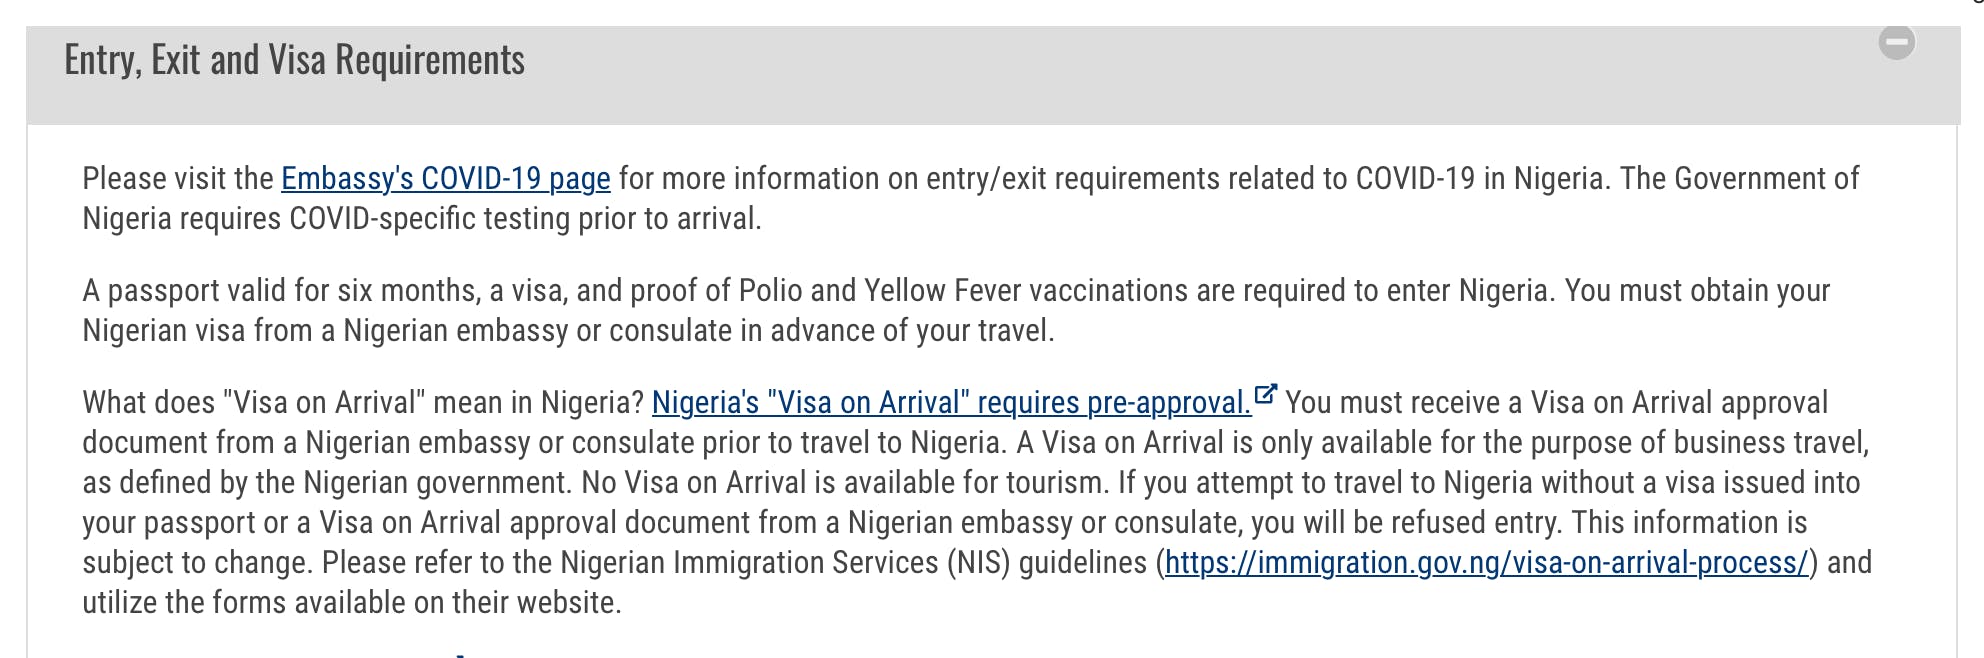 Nigeria Visa on arrival details for US citizens on the travel.state.gov